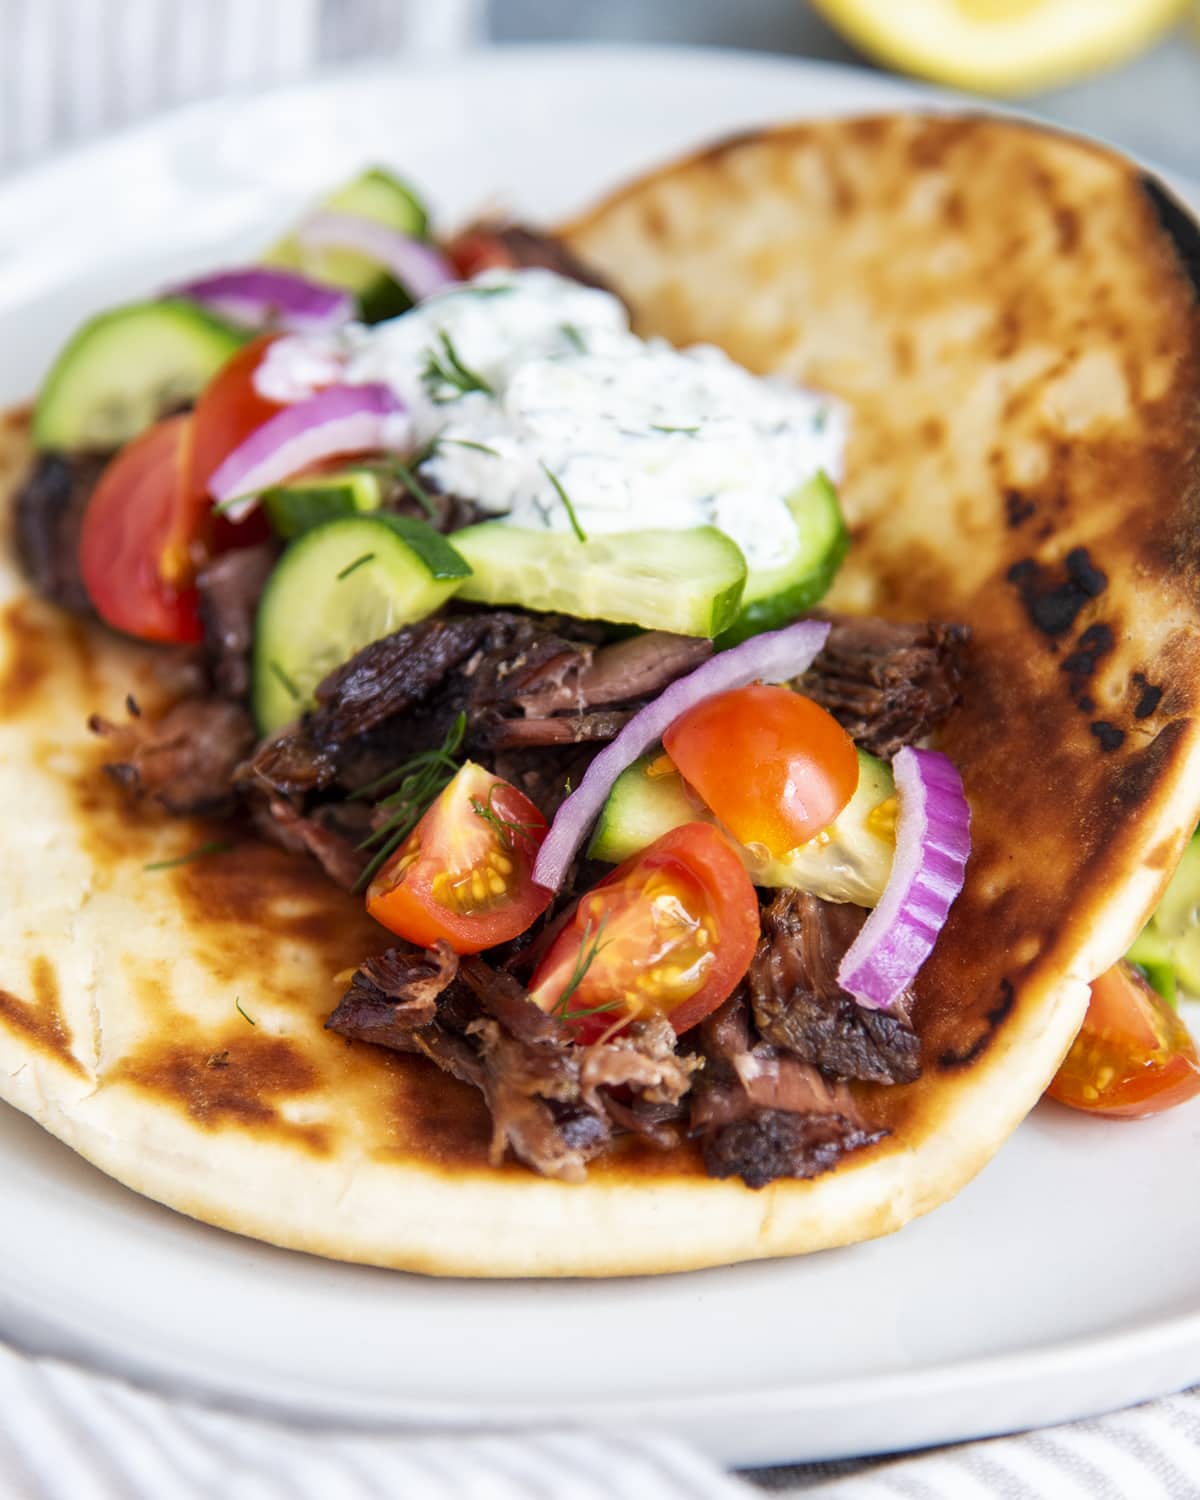 A beef gyro in a pita topped with tomatoes, onions, cucumbers, and tzatziki.